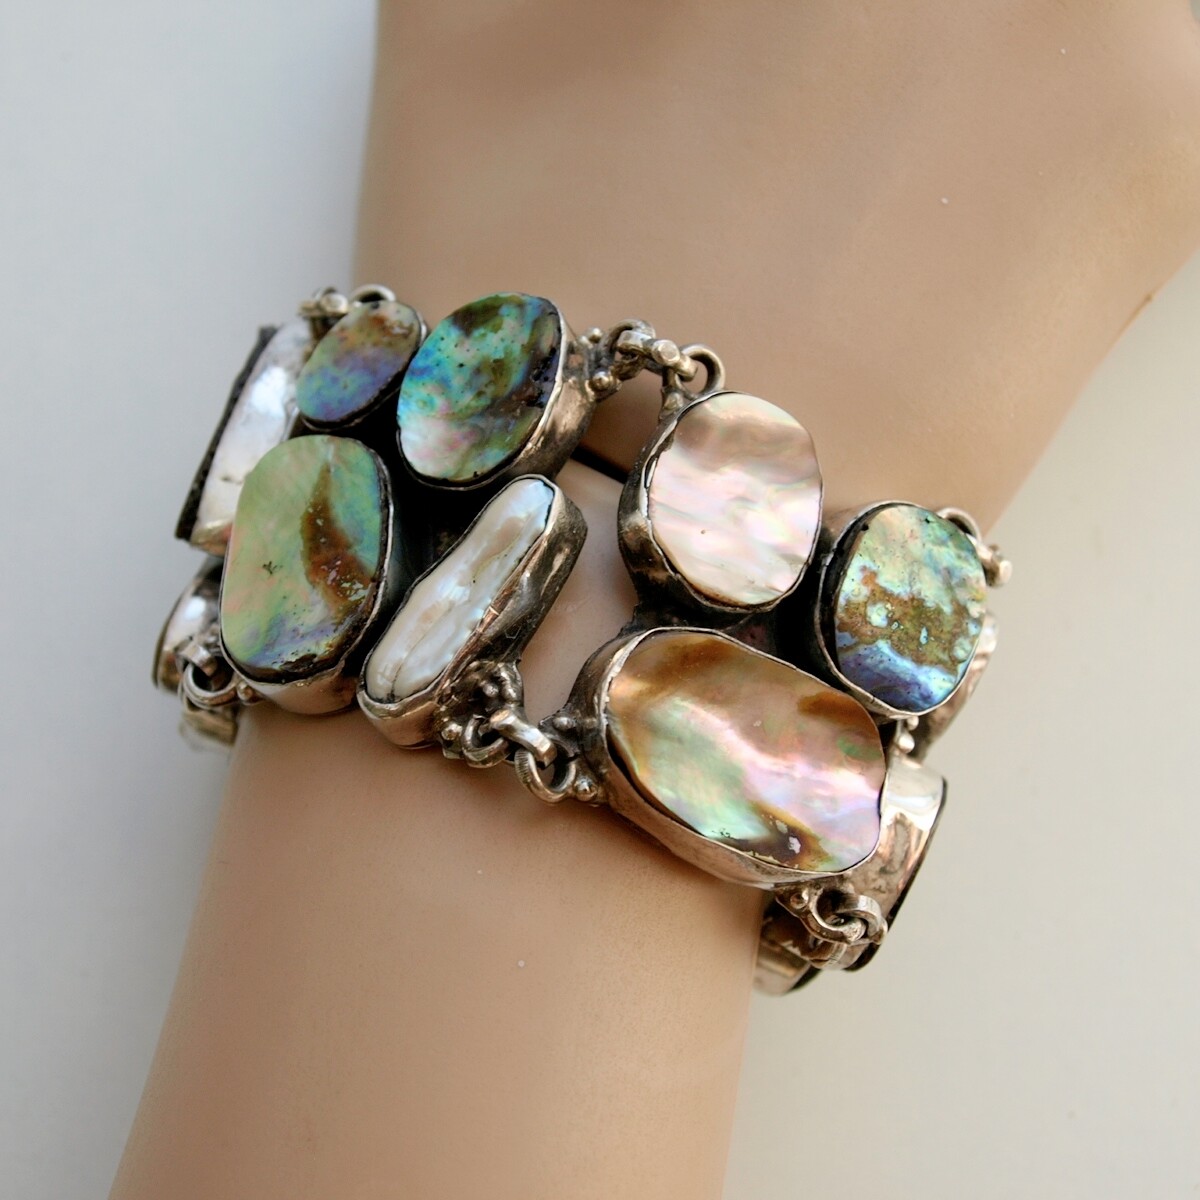 Ladies Chunky Solid Silver, Abalone & Blister Pearl Bracelet